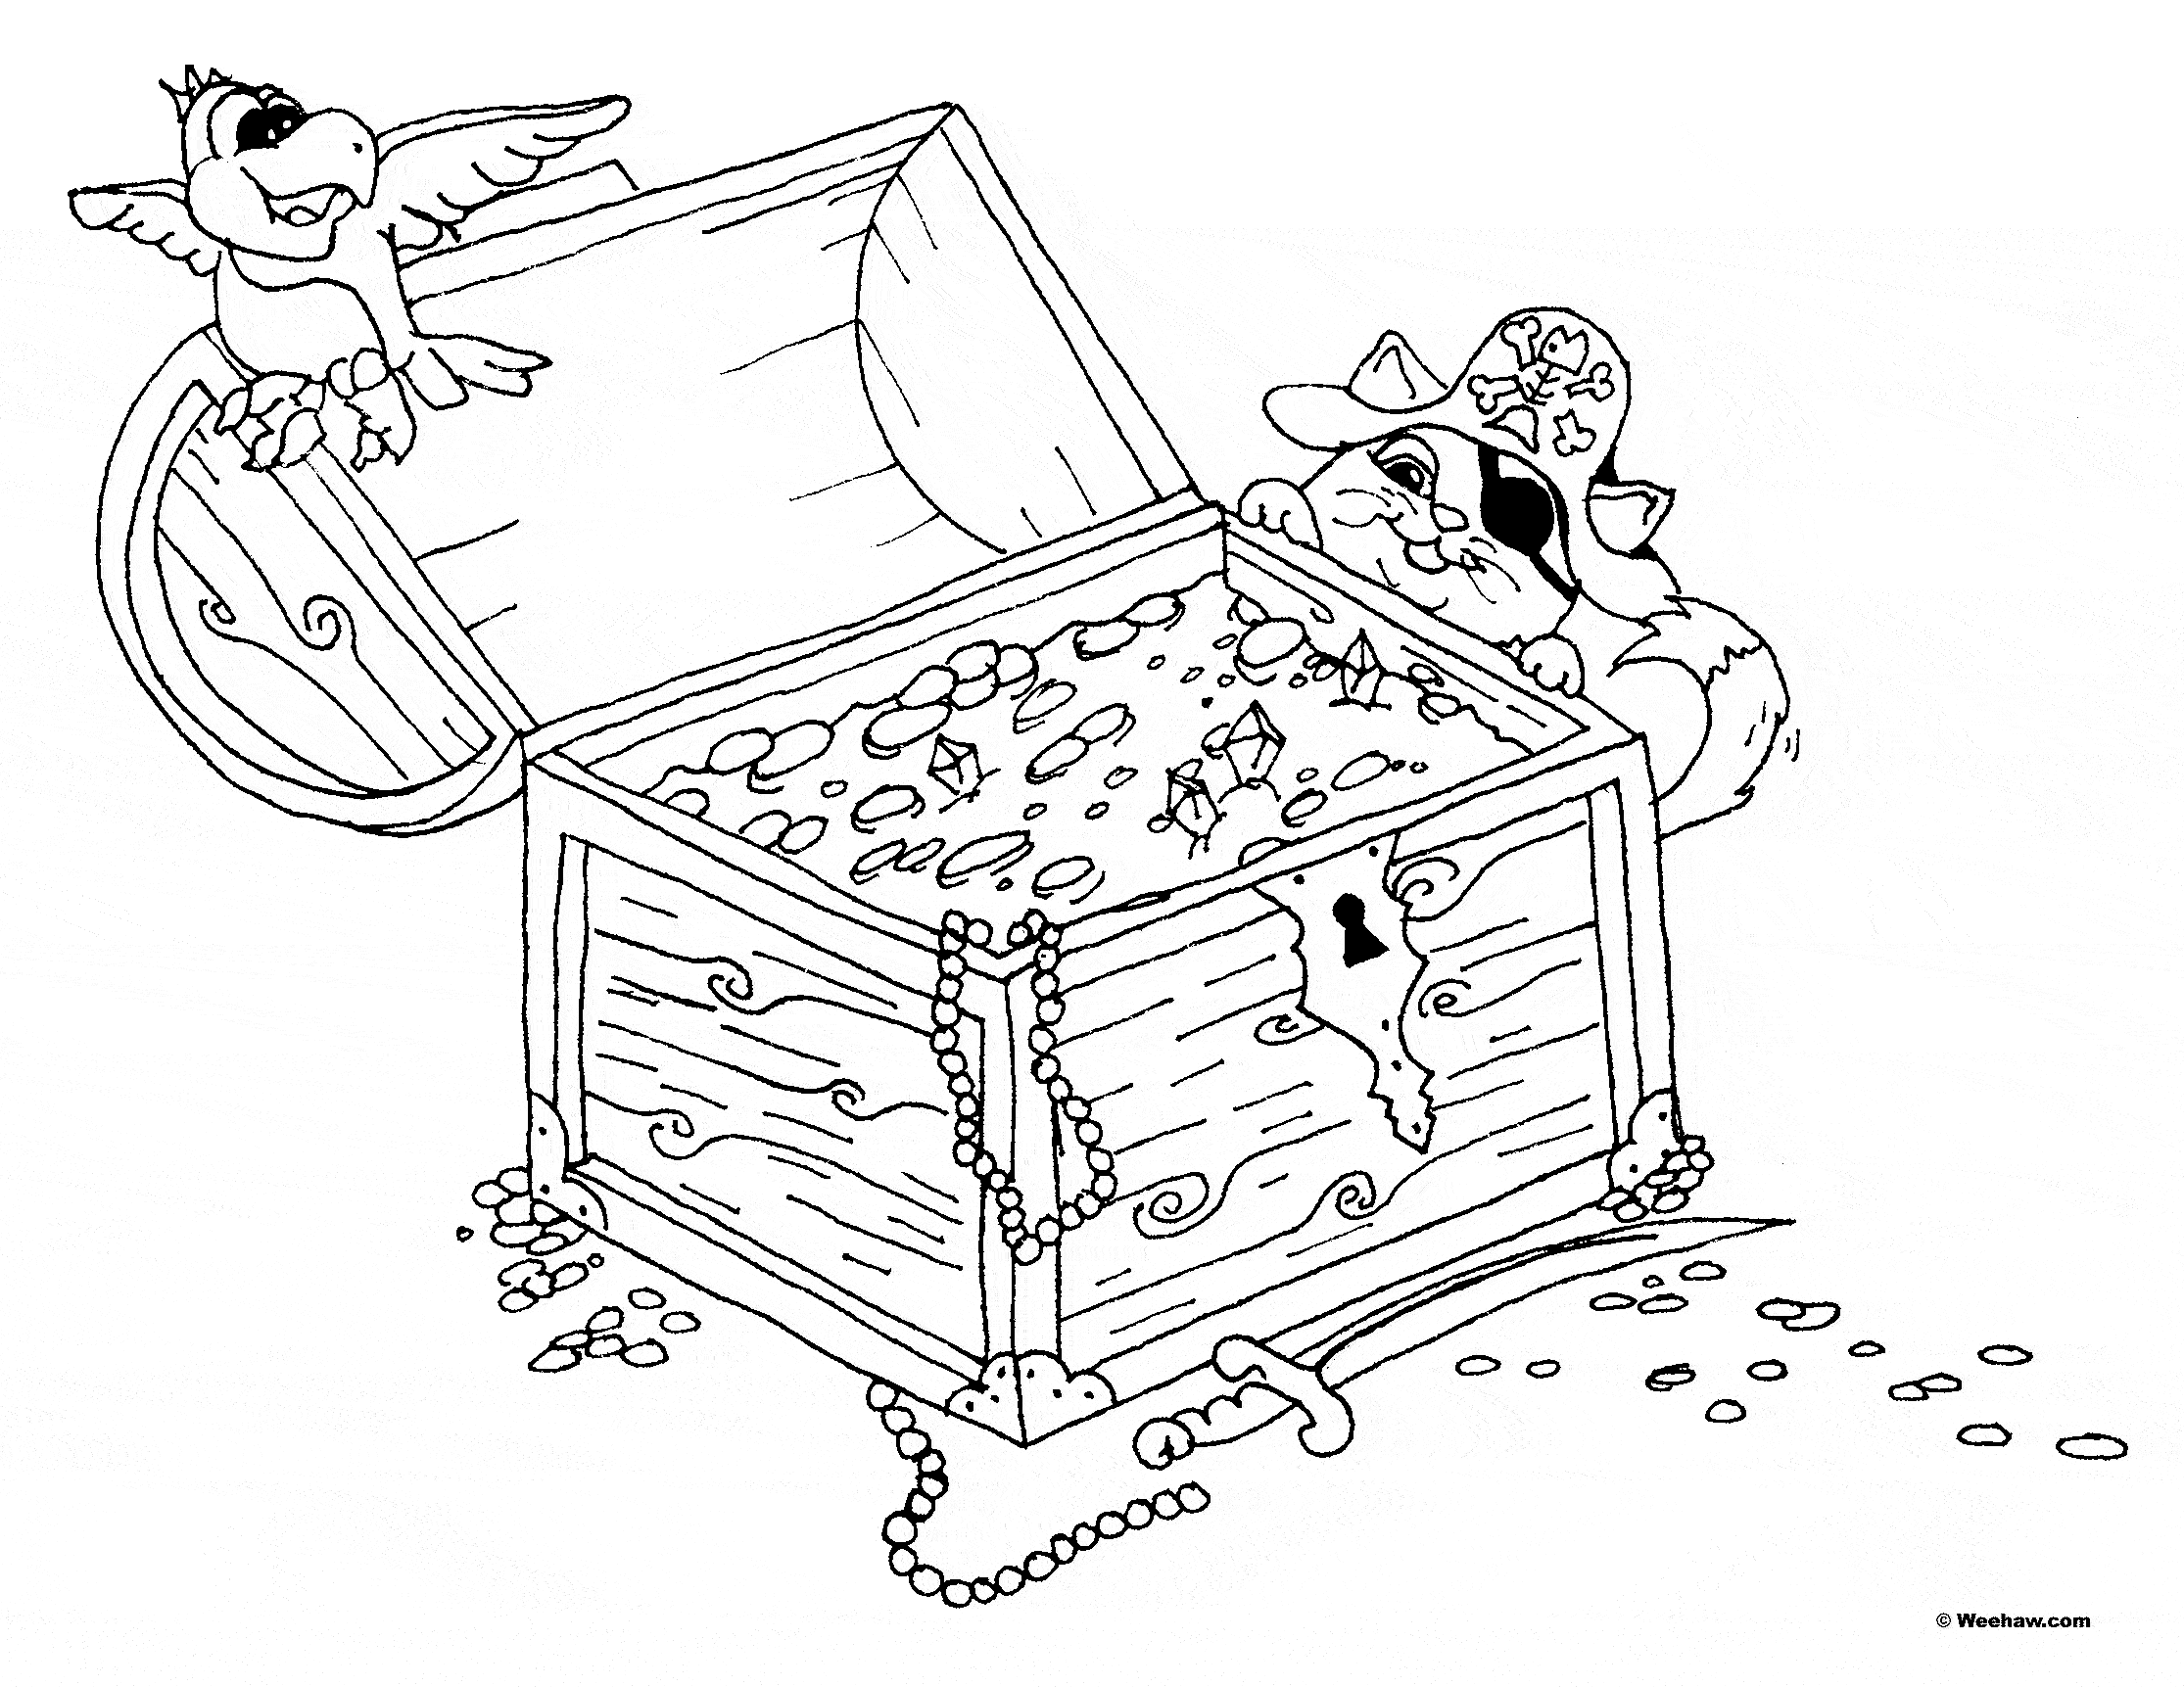 Sunken Pirate Ship Coloring Page - HiColoringPages